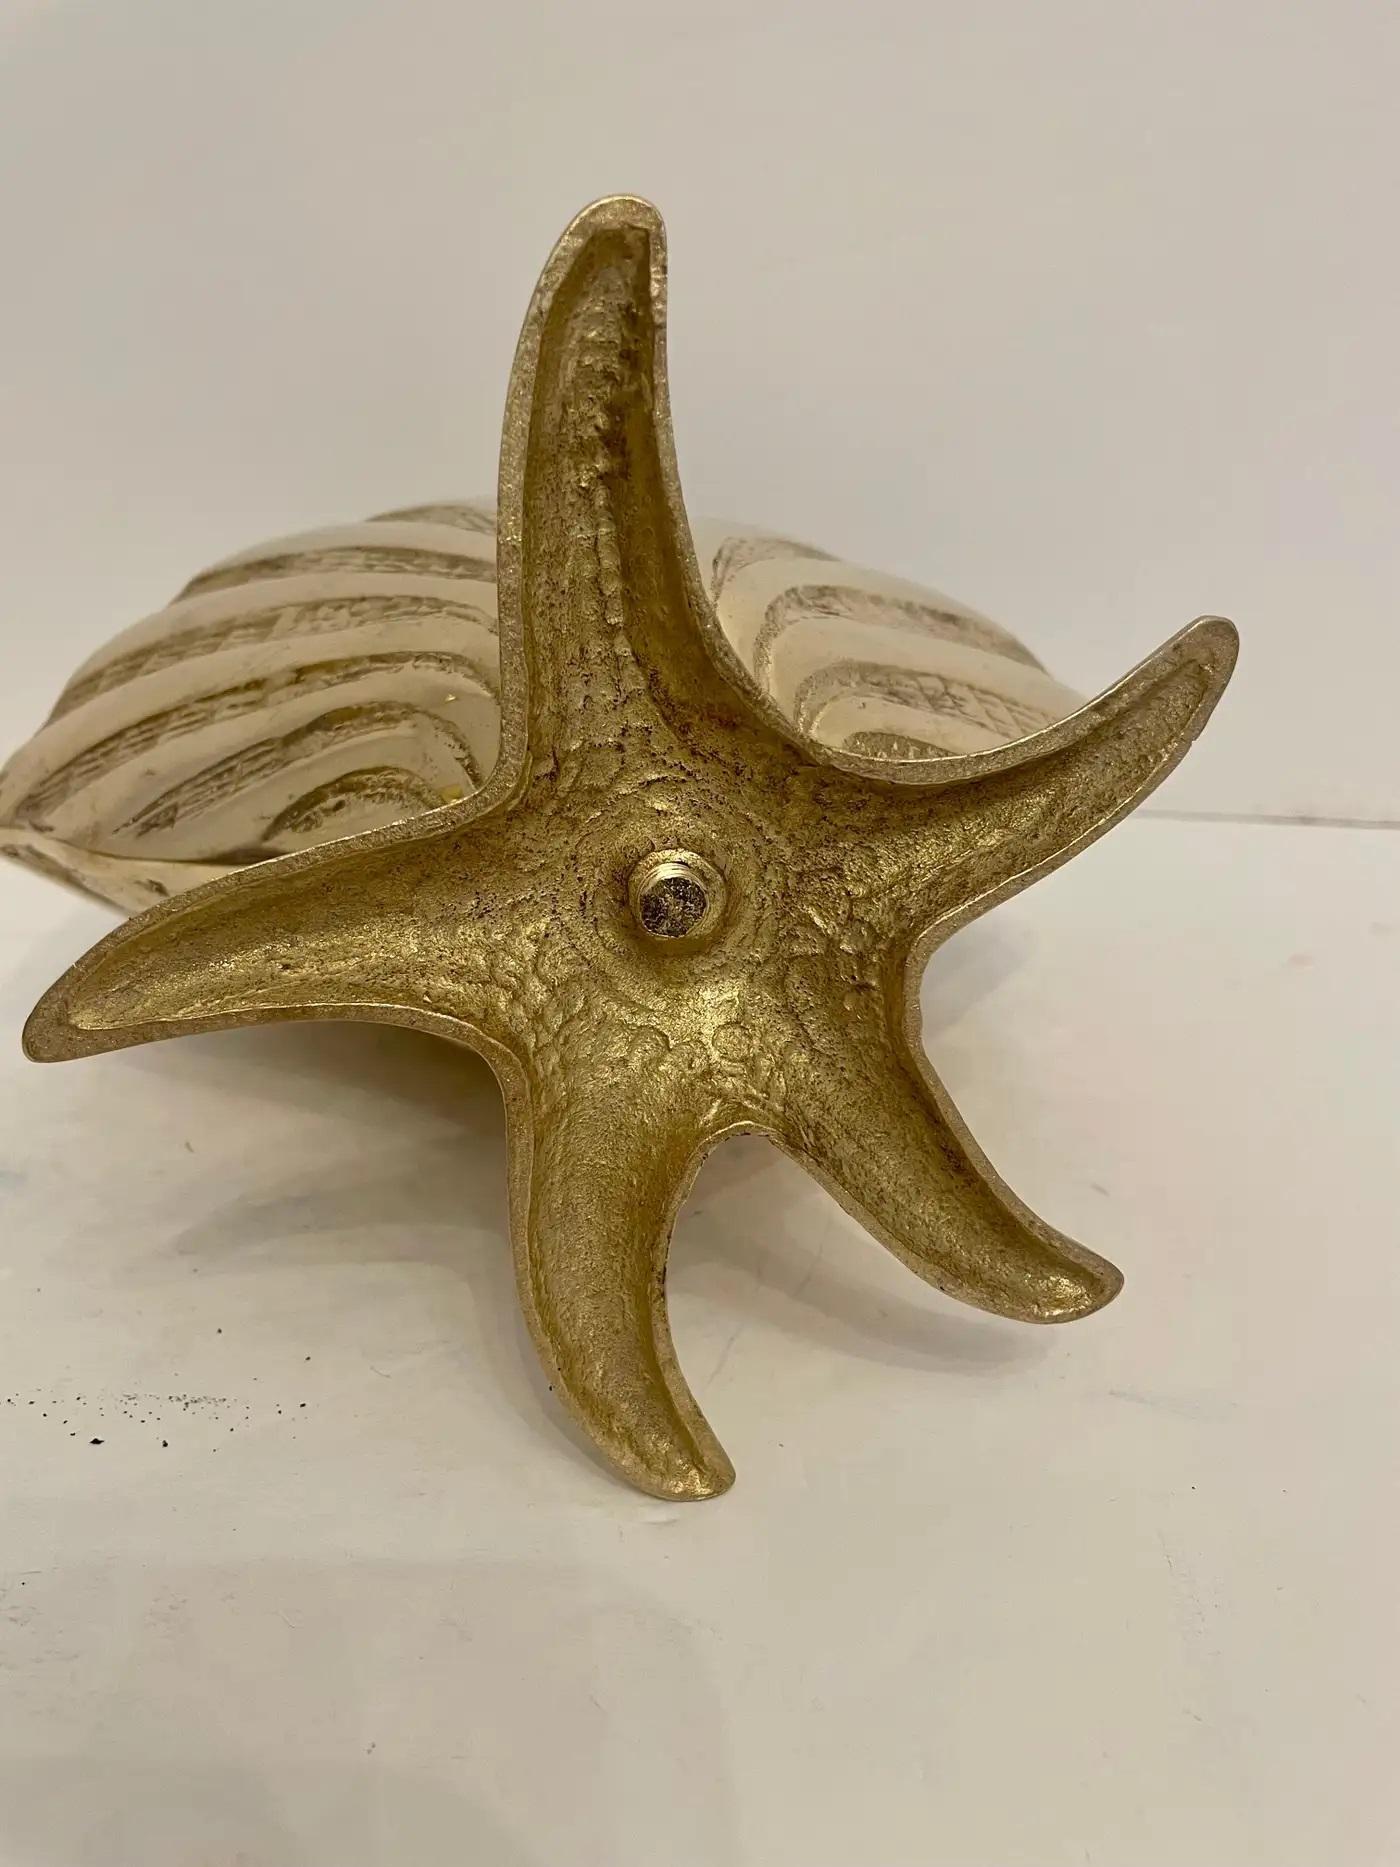 Large brass sea shell planter on starfish base. Very unusual design with nice detail. Nice hand polished finish. Overall nice condition. Ready for your beach house! QUICK SHIP, FREE in USA